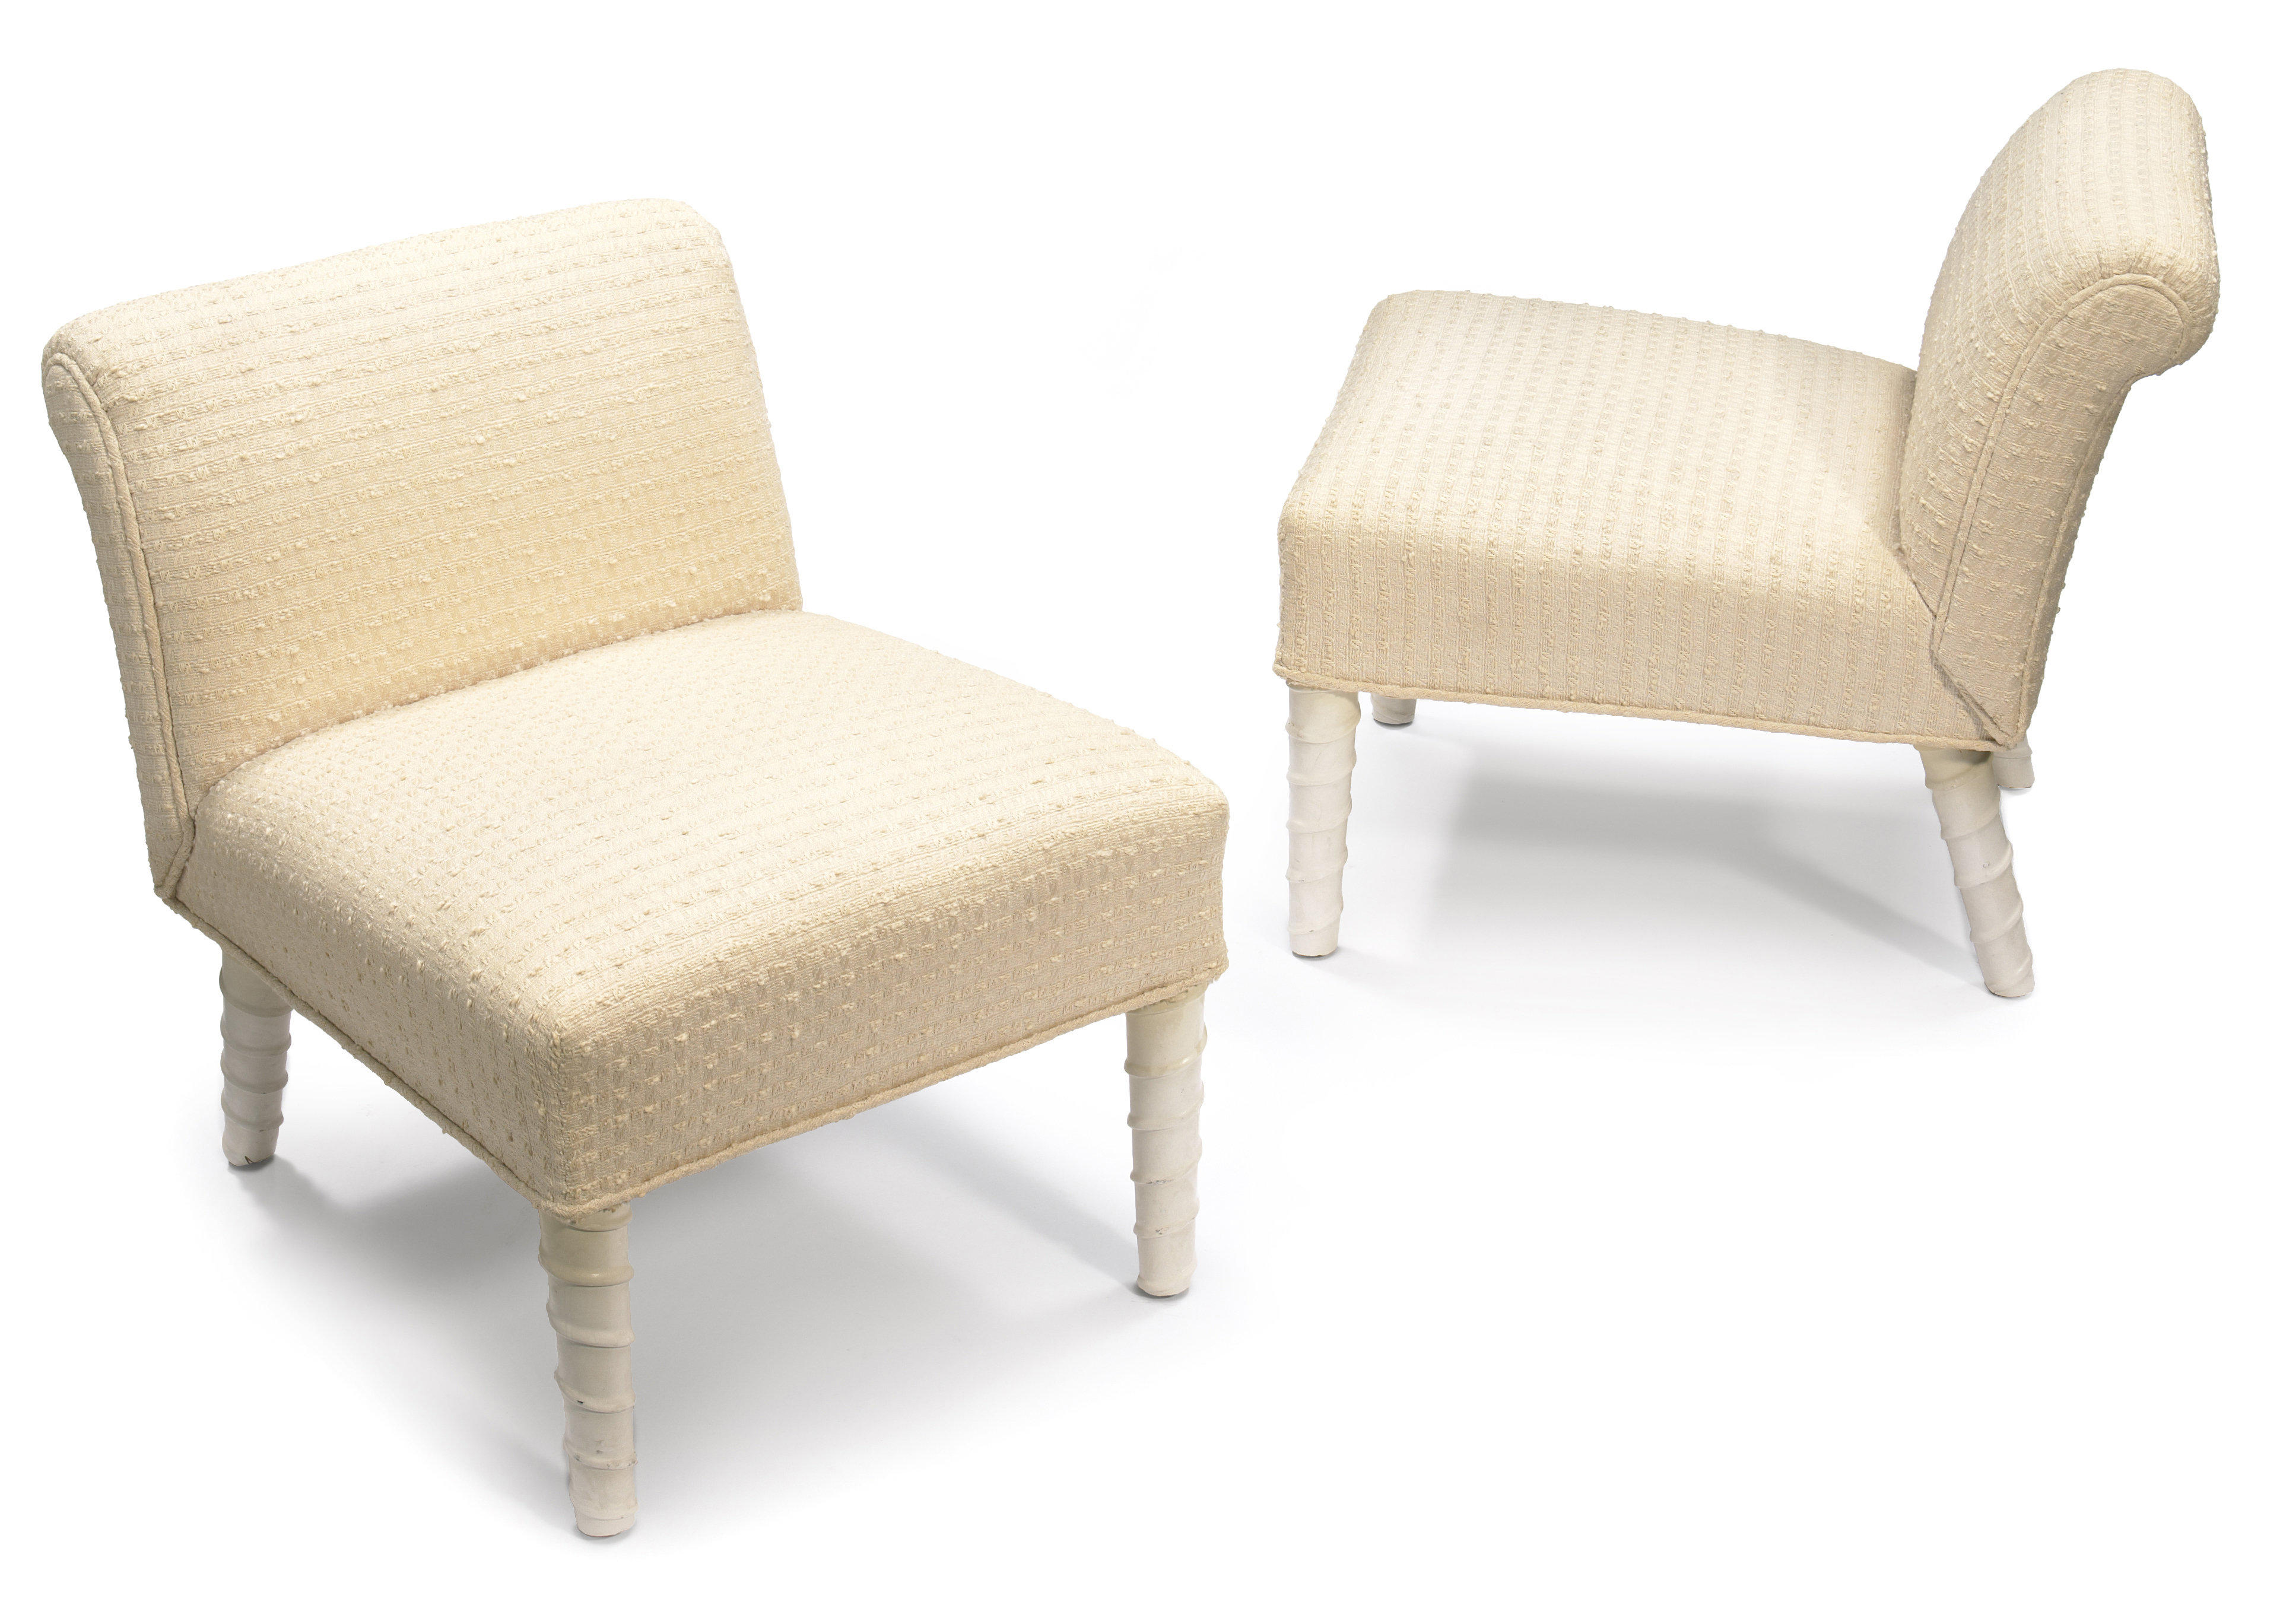 A pair of William Haines upholstered